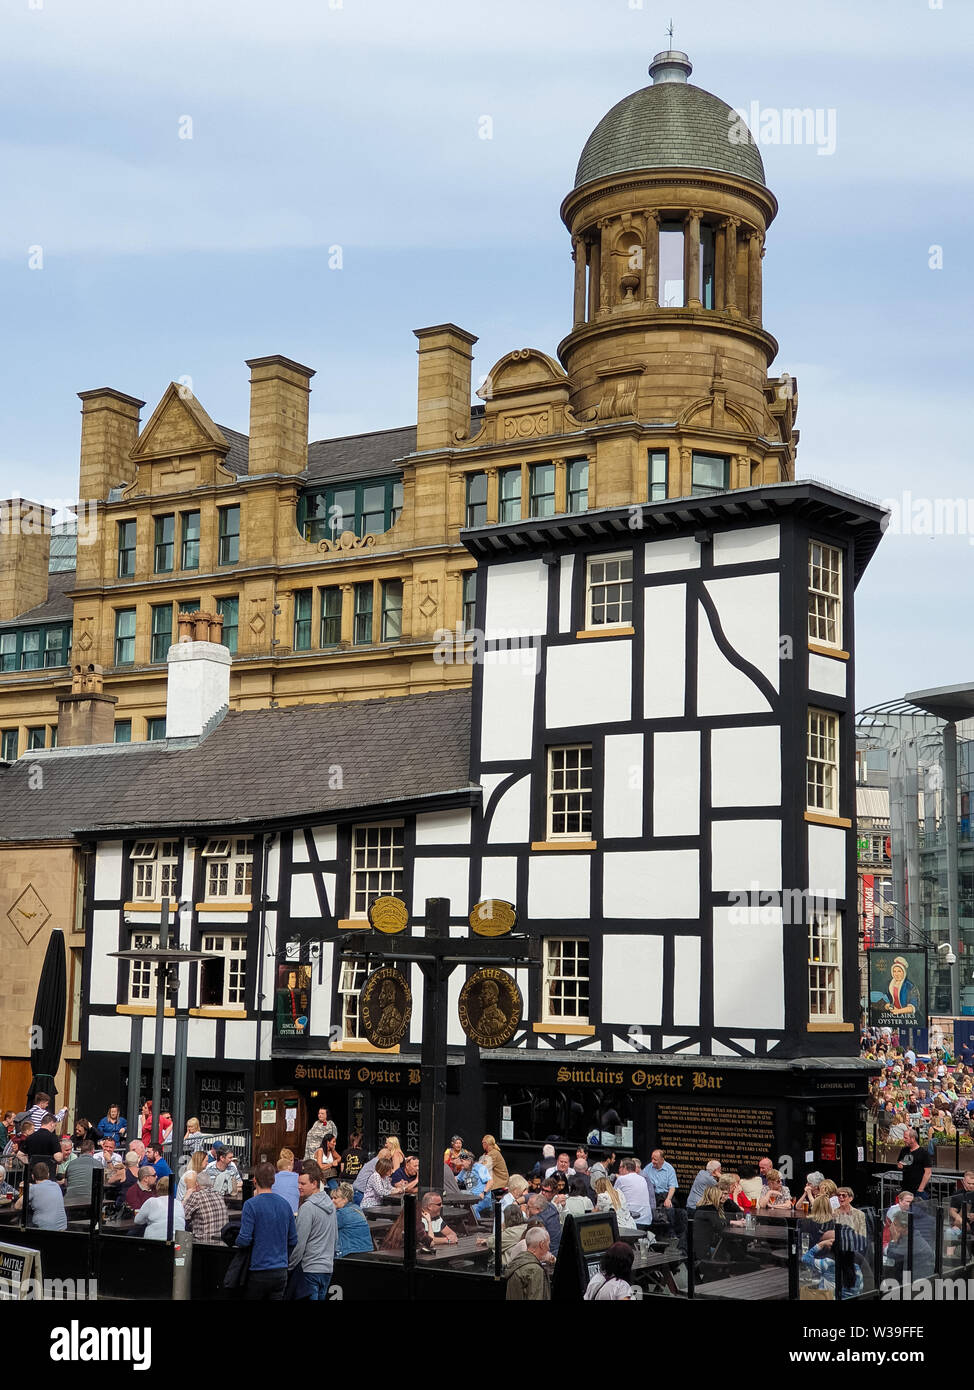 Manchester, United Kingdom - April 23, 2019: People enjoy themselves seated outsideat a pub in Manchster city centre on a beautuful spring afternoon Stock Photo